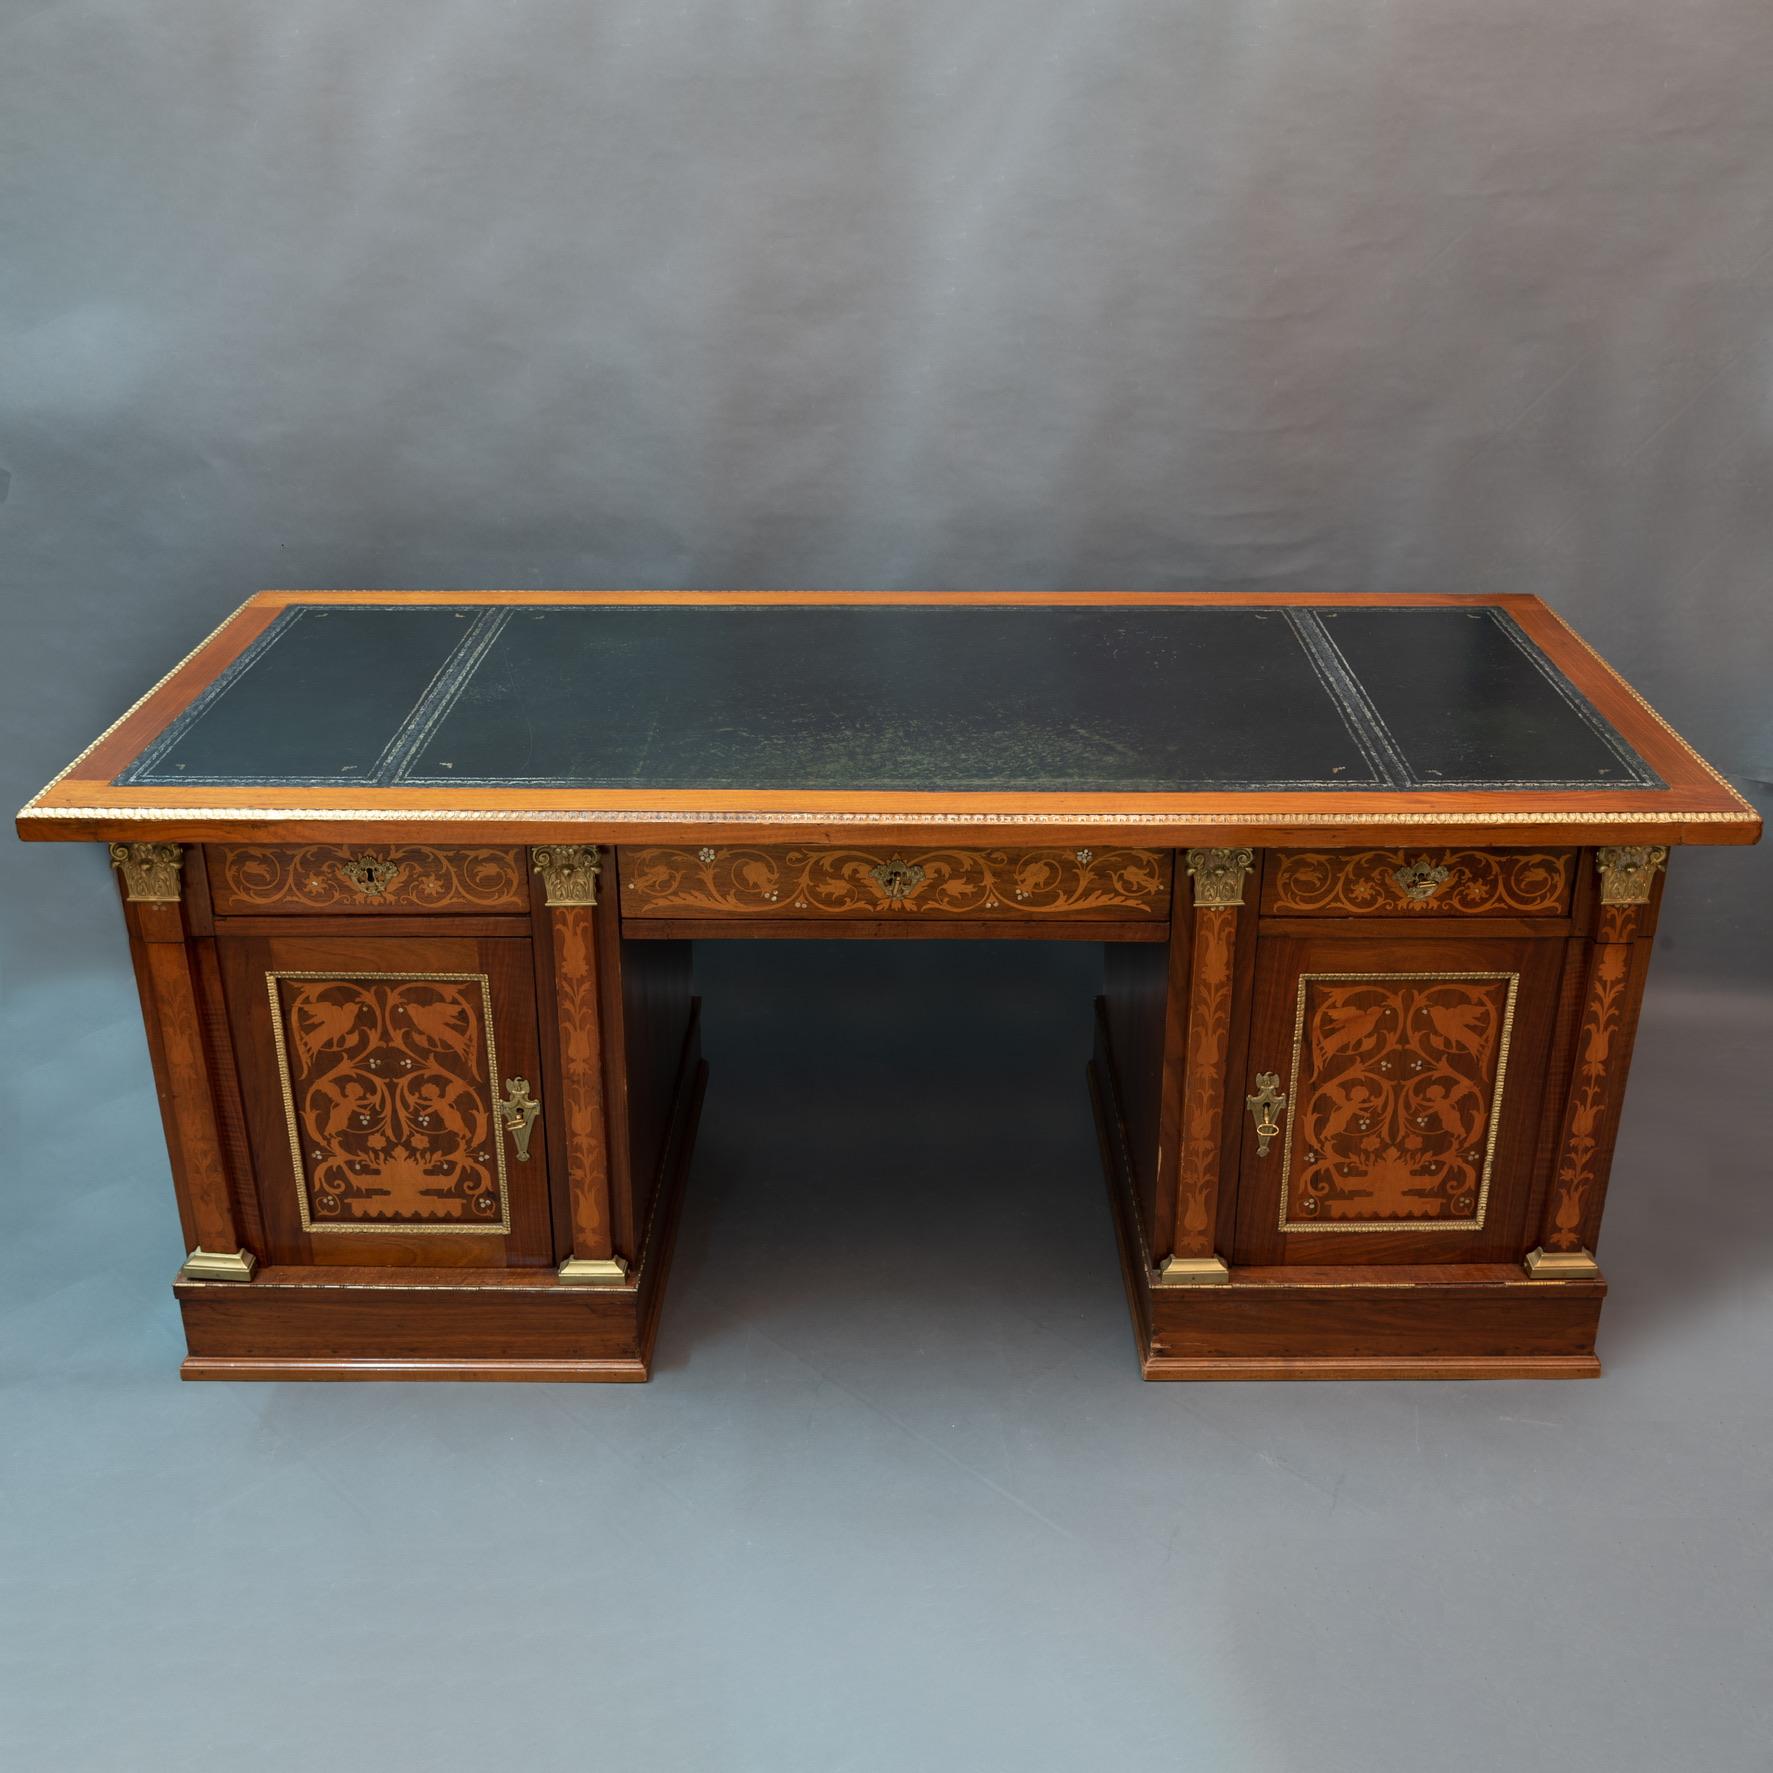 A magnificent stunning and very rare English Georgian desk, room center, leather desktop.
In mahogany wood, it is fully inlaid with light-colored wood from fruit trees.
The inlay is of uncommon elegance and harmony, embellishing every part of this